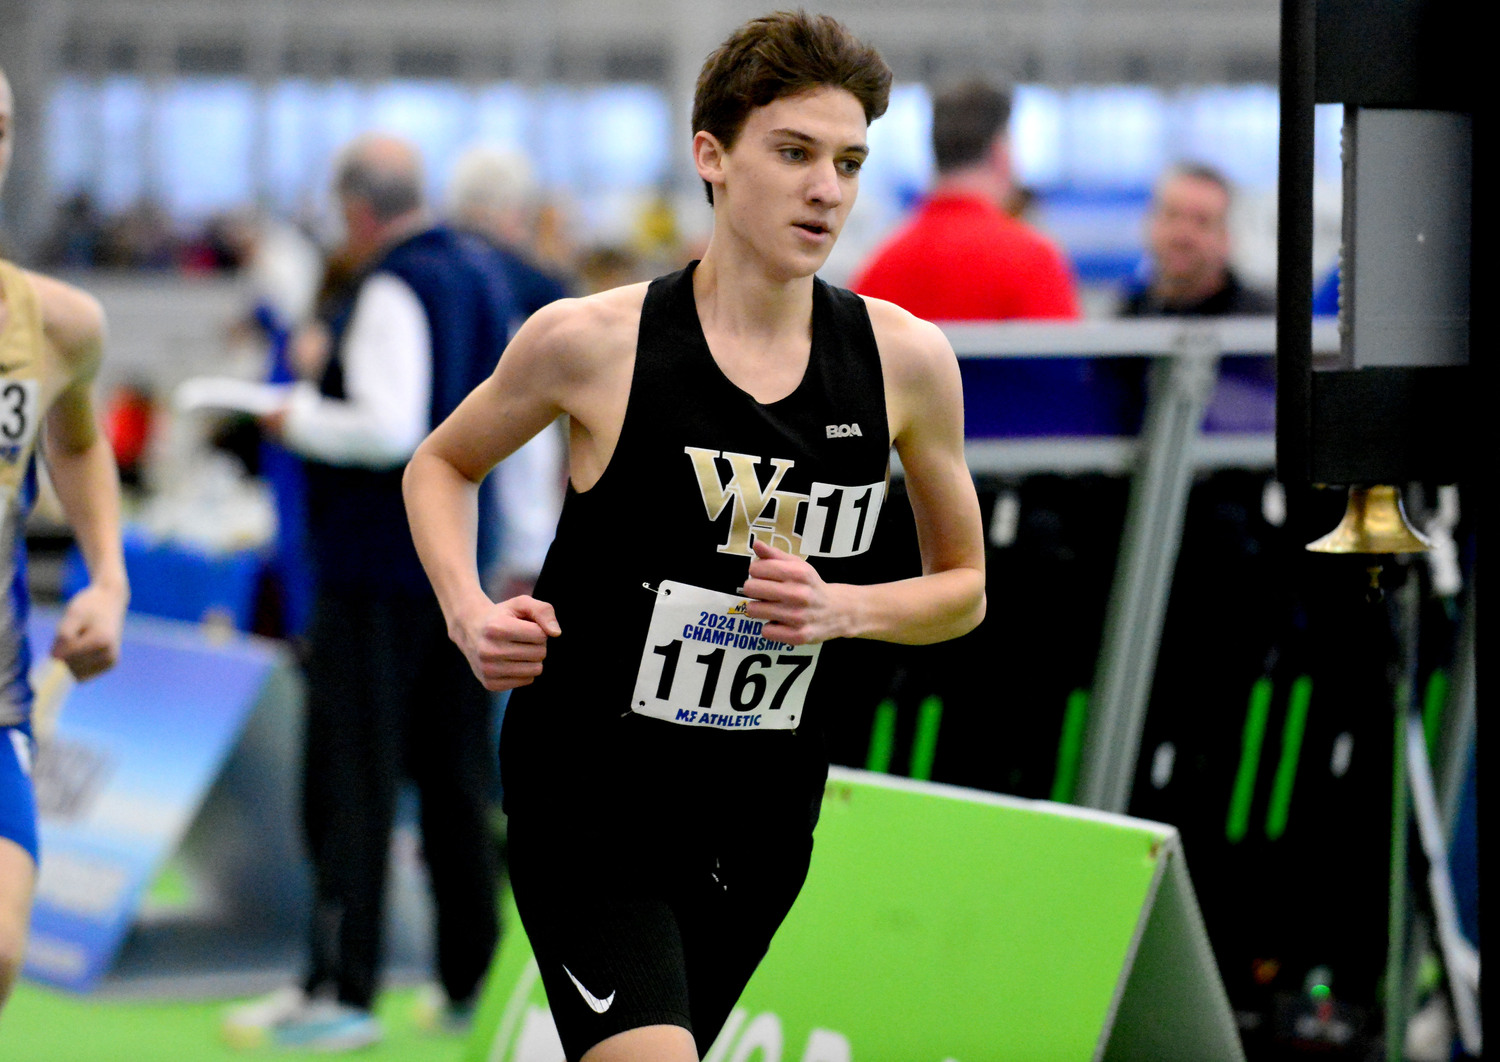 Westhampton Beach senior Trevor Hayes placed 11th overall in the 1,600-meter race at the New York State Indoor Track and Field Championships at the Ocean Breeze Athletic Complex on Staten Island on Saturday.   DAMION REID